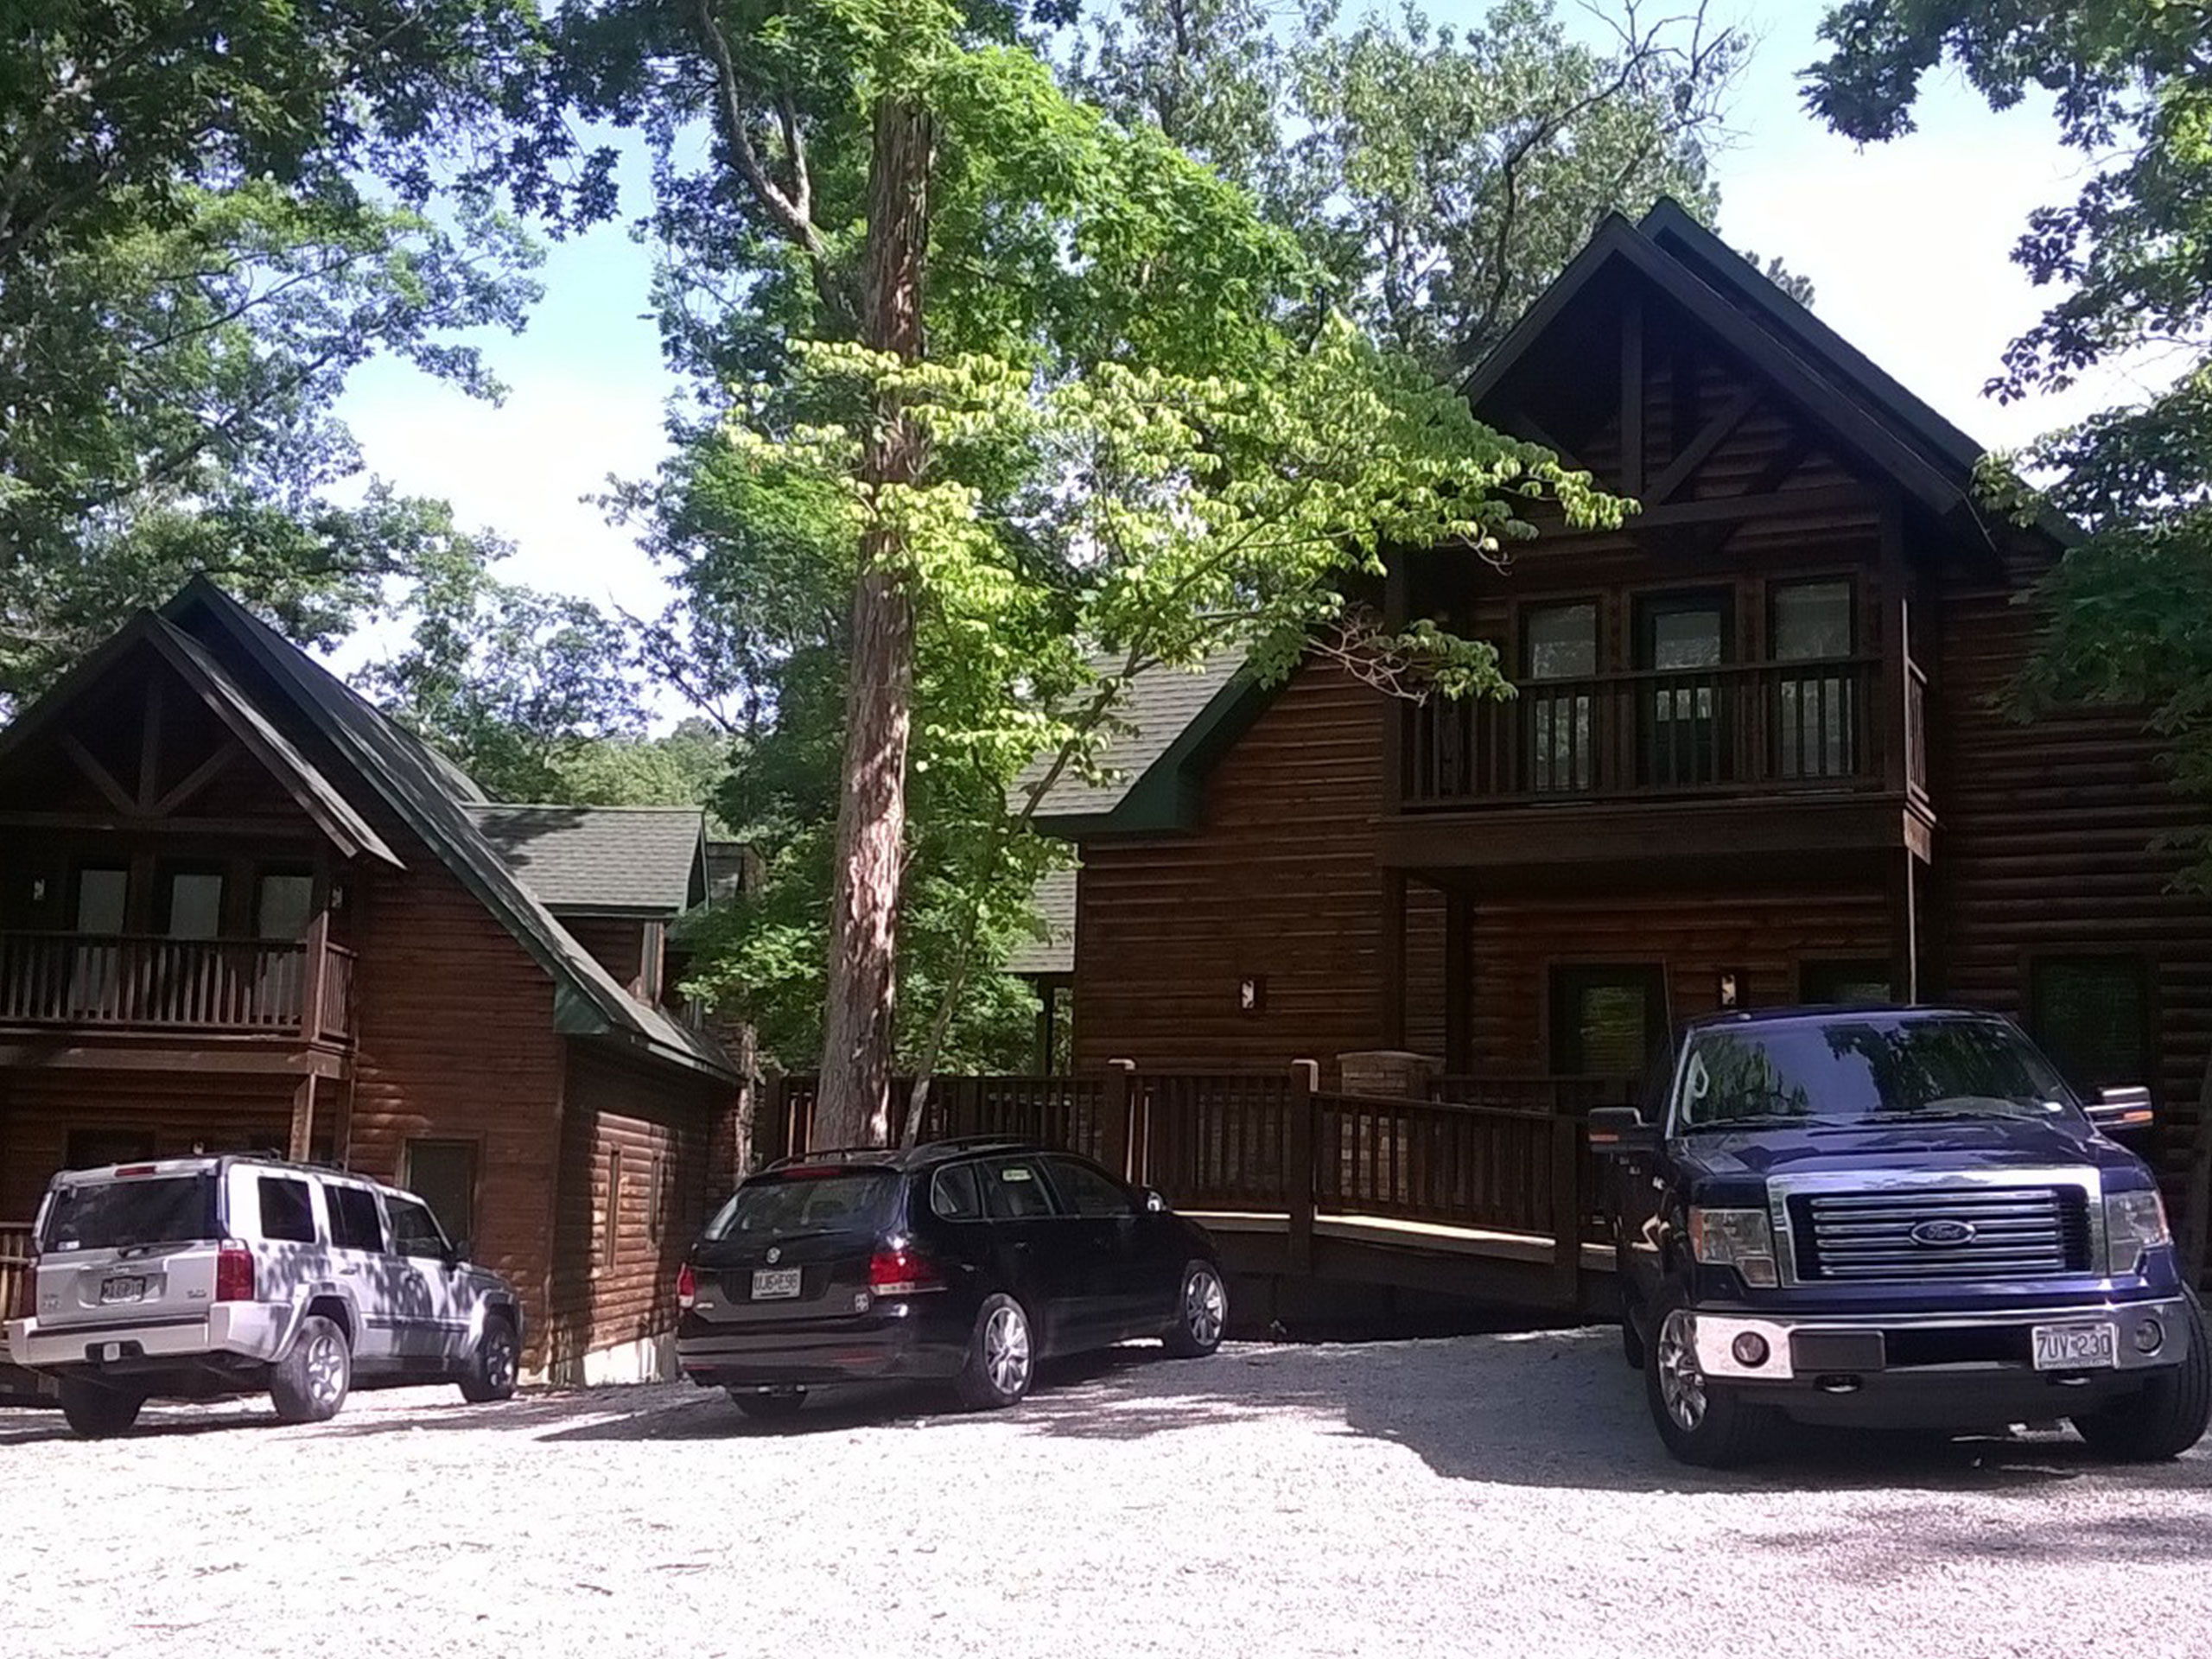 Two large cabins for Legacy Builders fishing Retreat with three vehicles parked in front